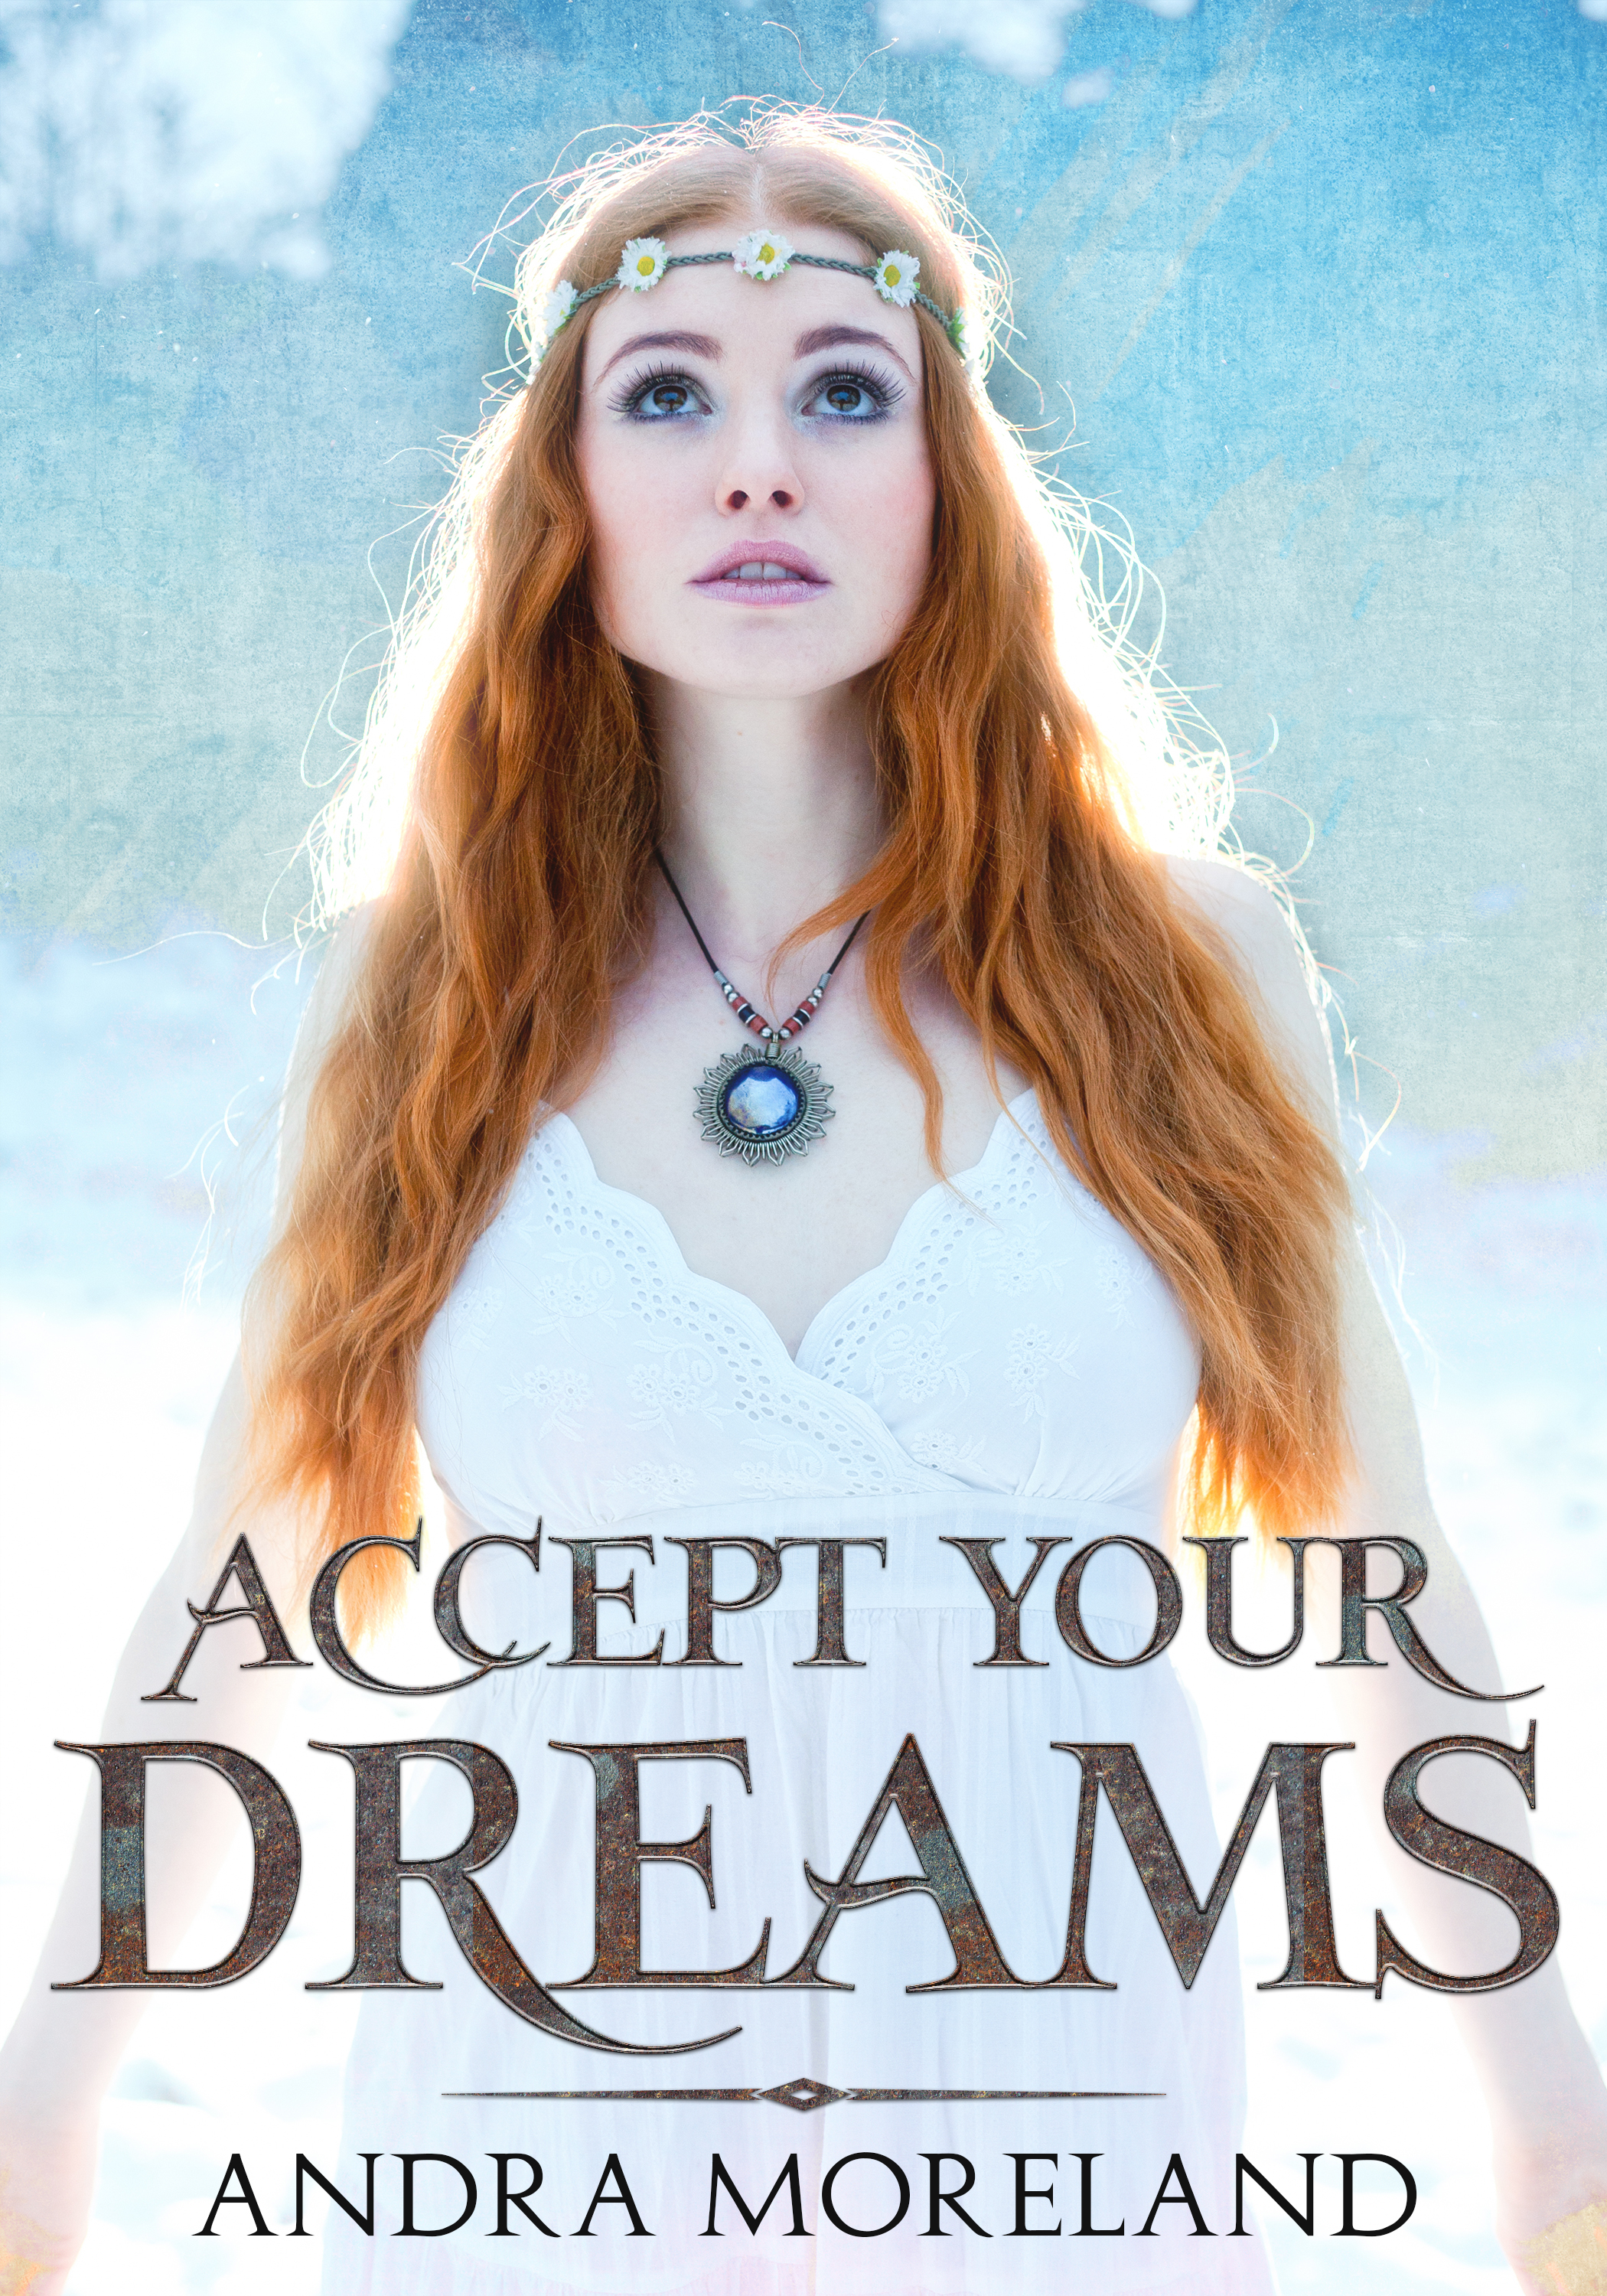 FREE: Accept your dreams by Andra Moreland